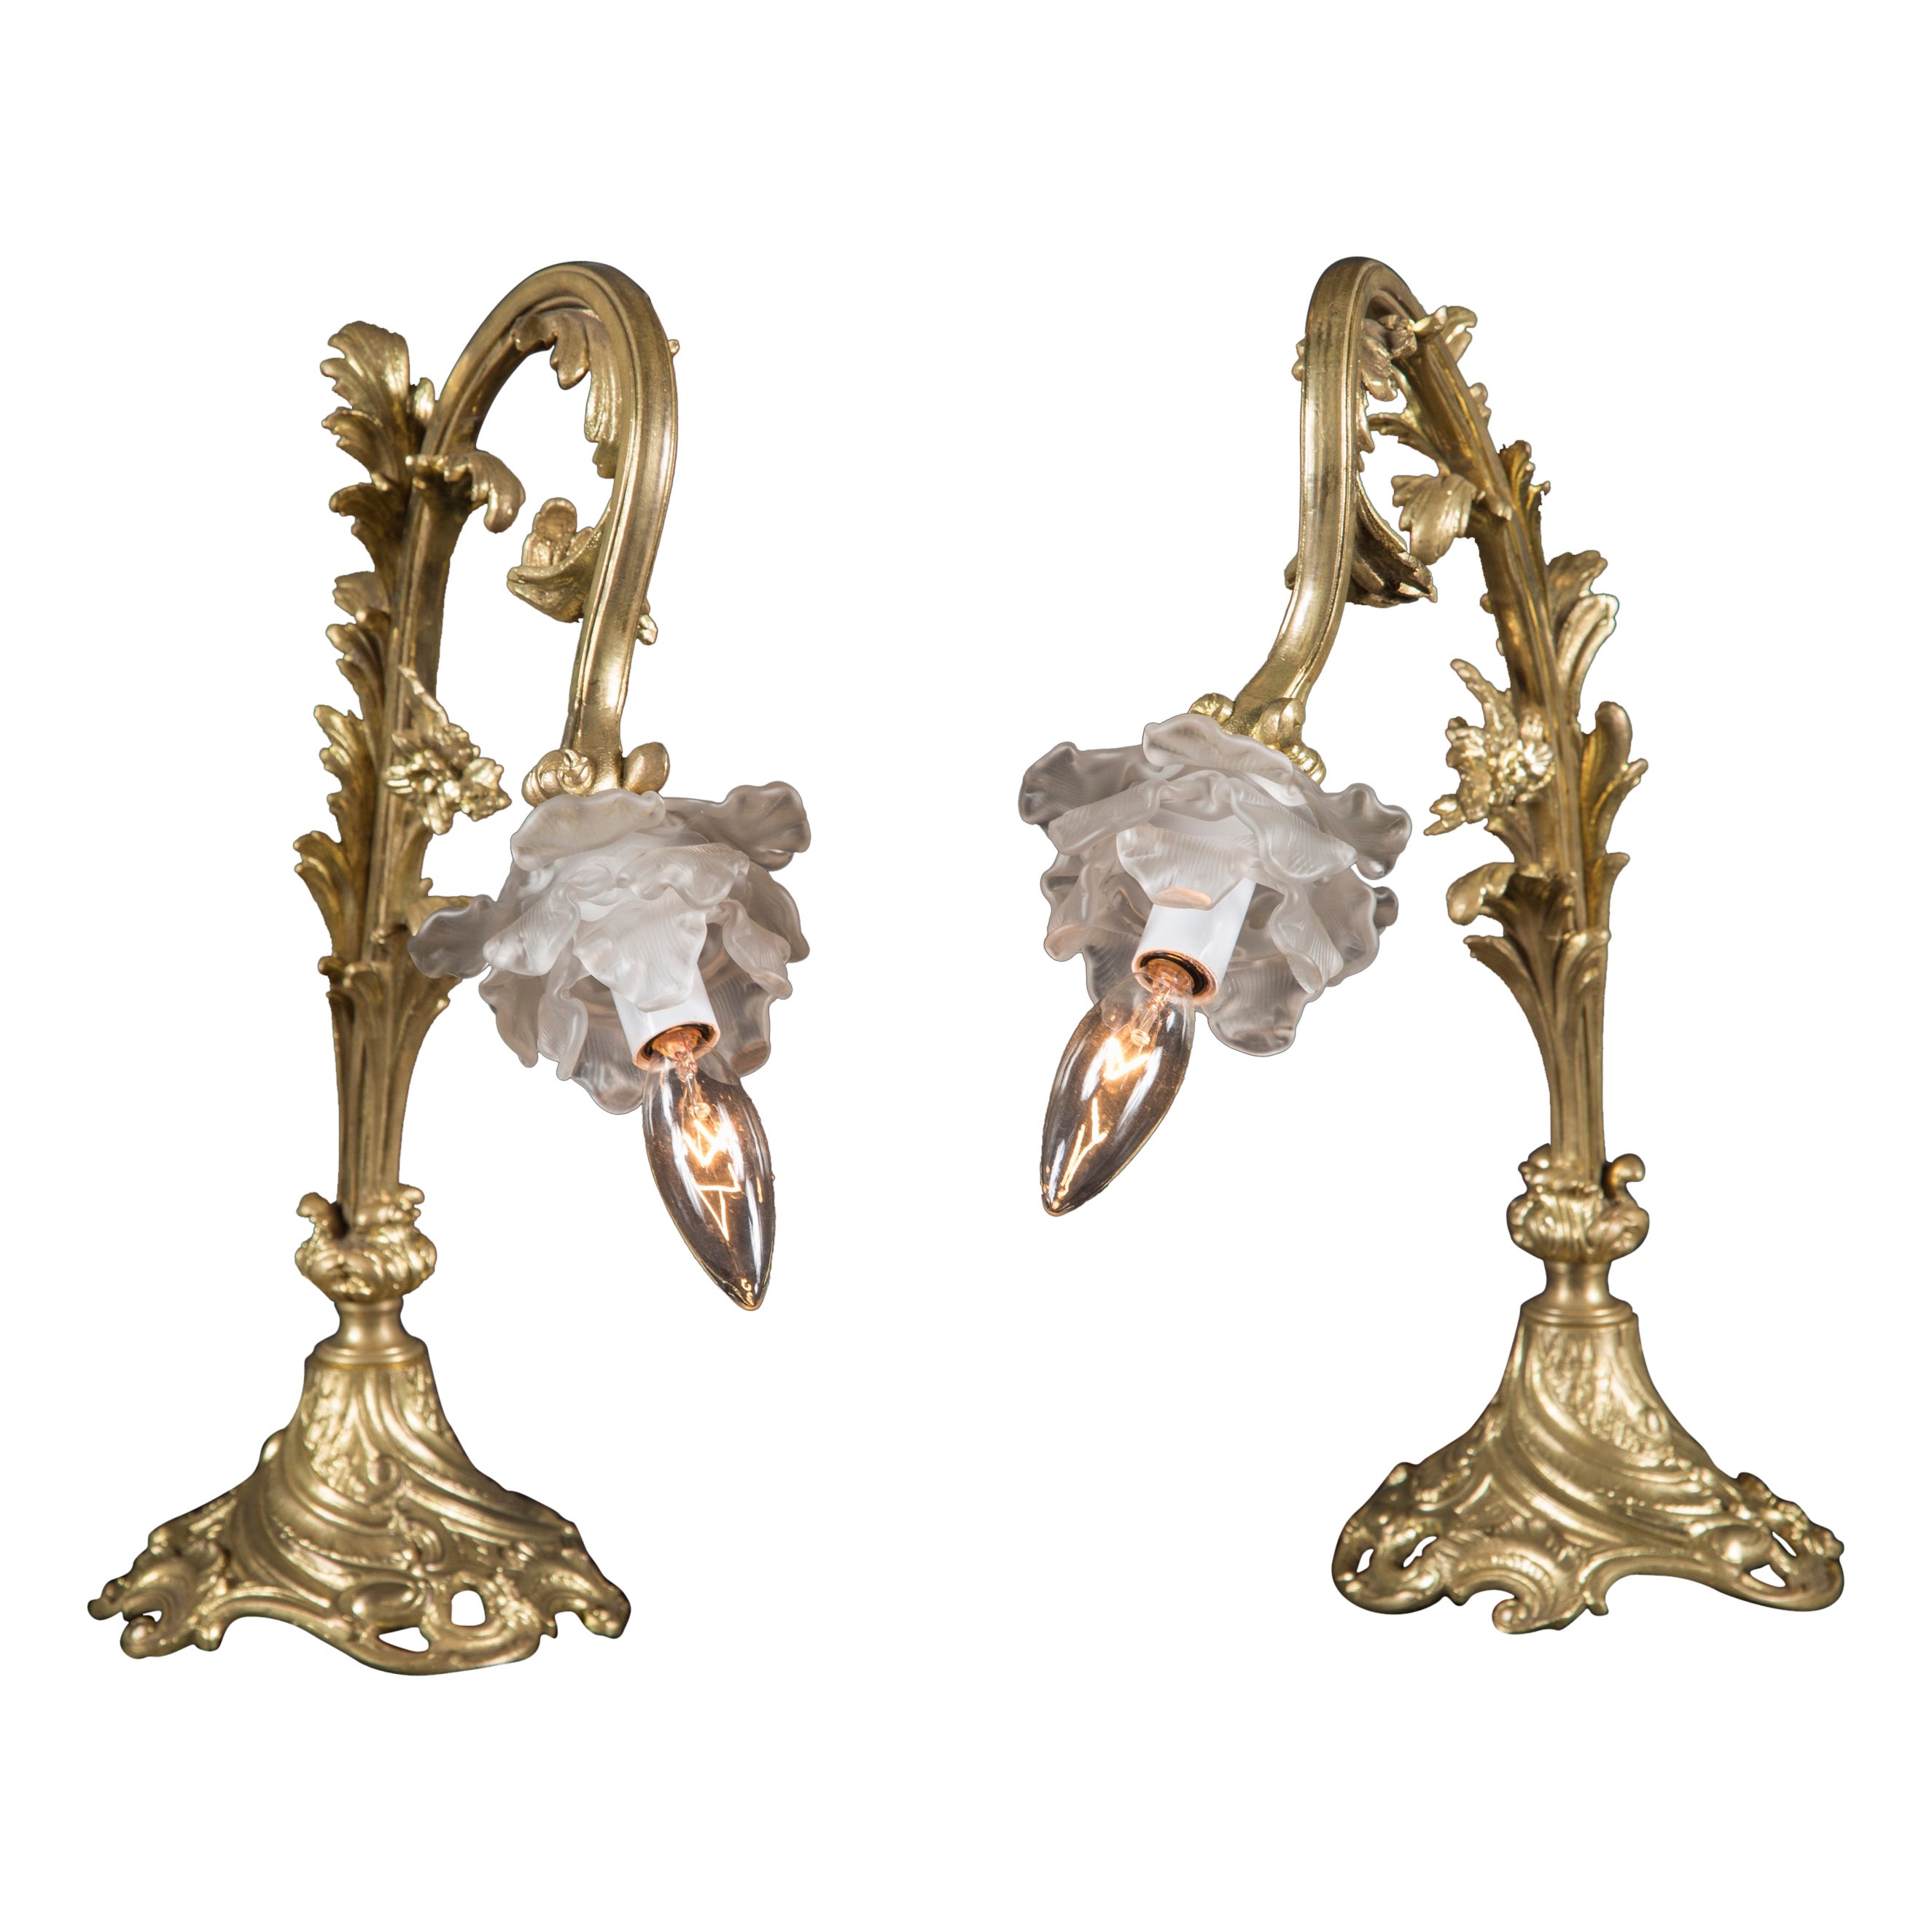 Pair of Art Nouveau Lamps with Delicate Satin Glass Roses, French, 19th Century